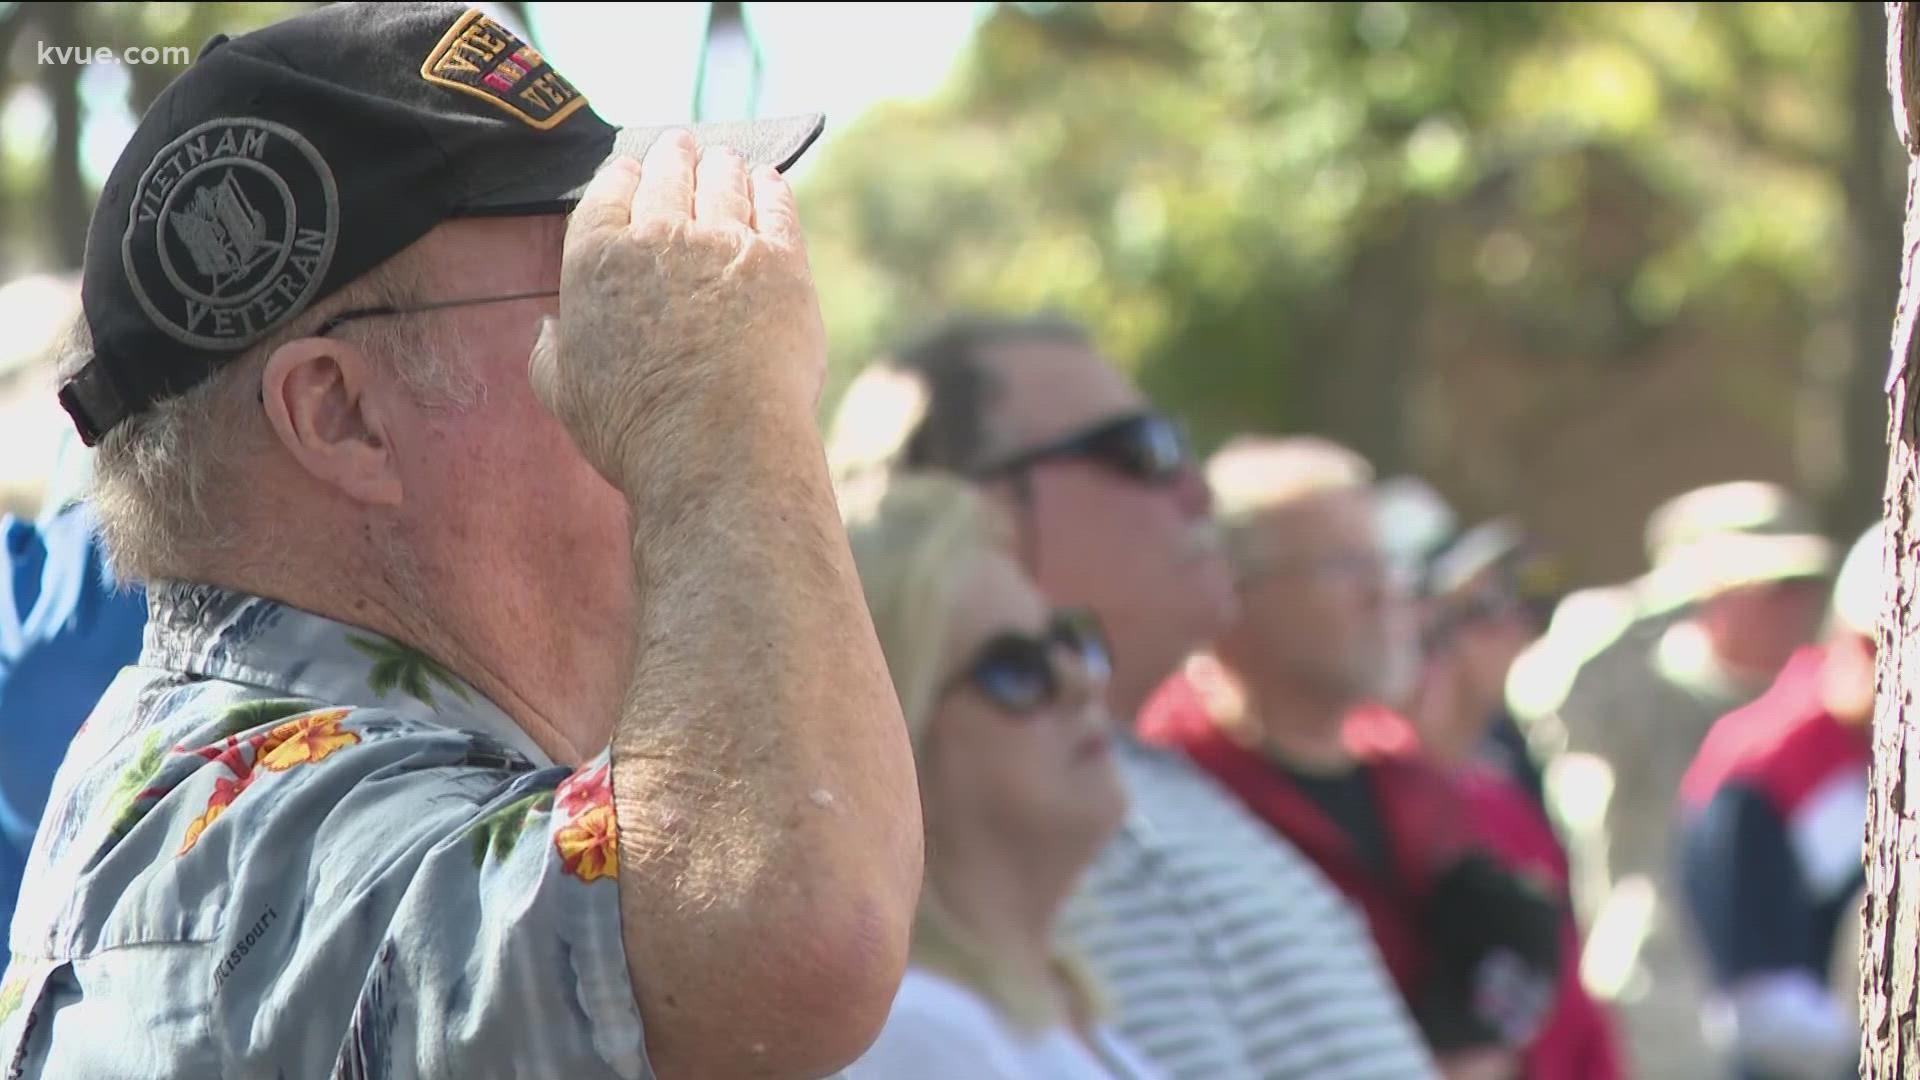 Hundreds of people attended the Williamson County's annual Veterans Day ceremony.